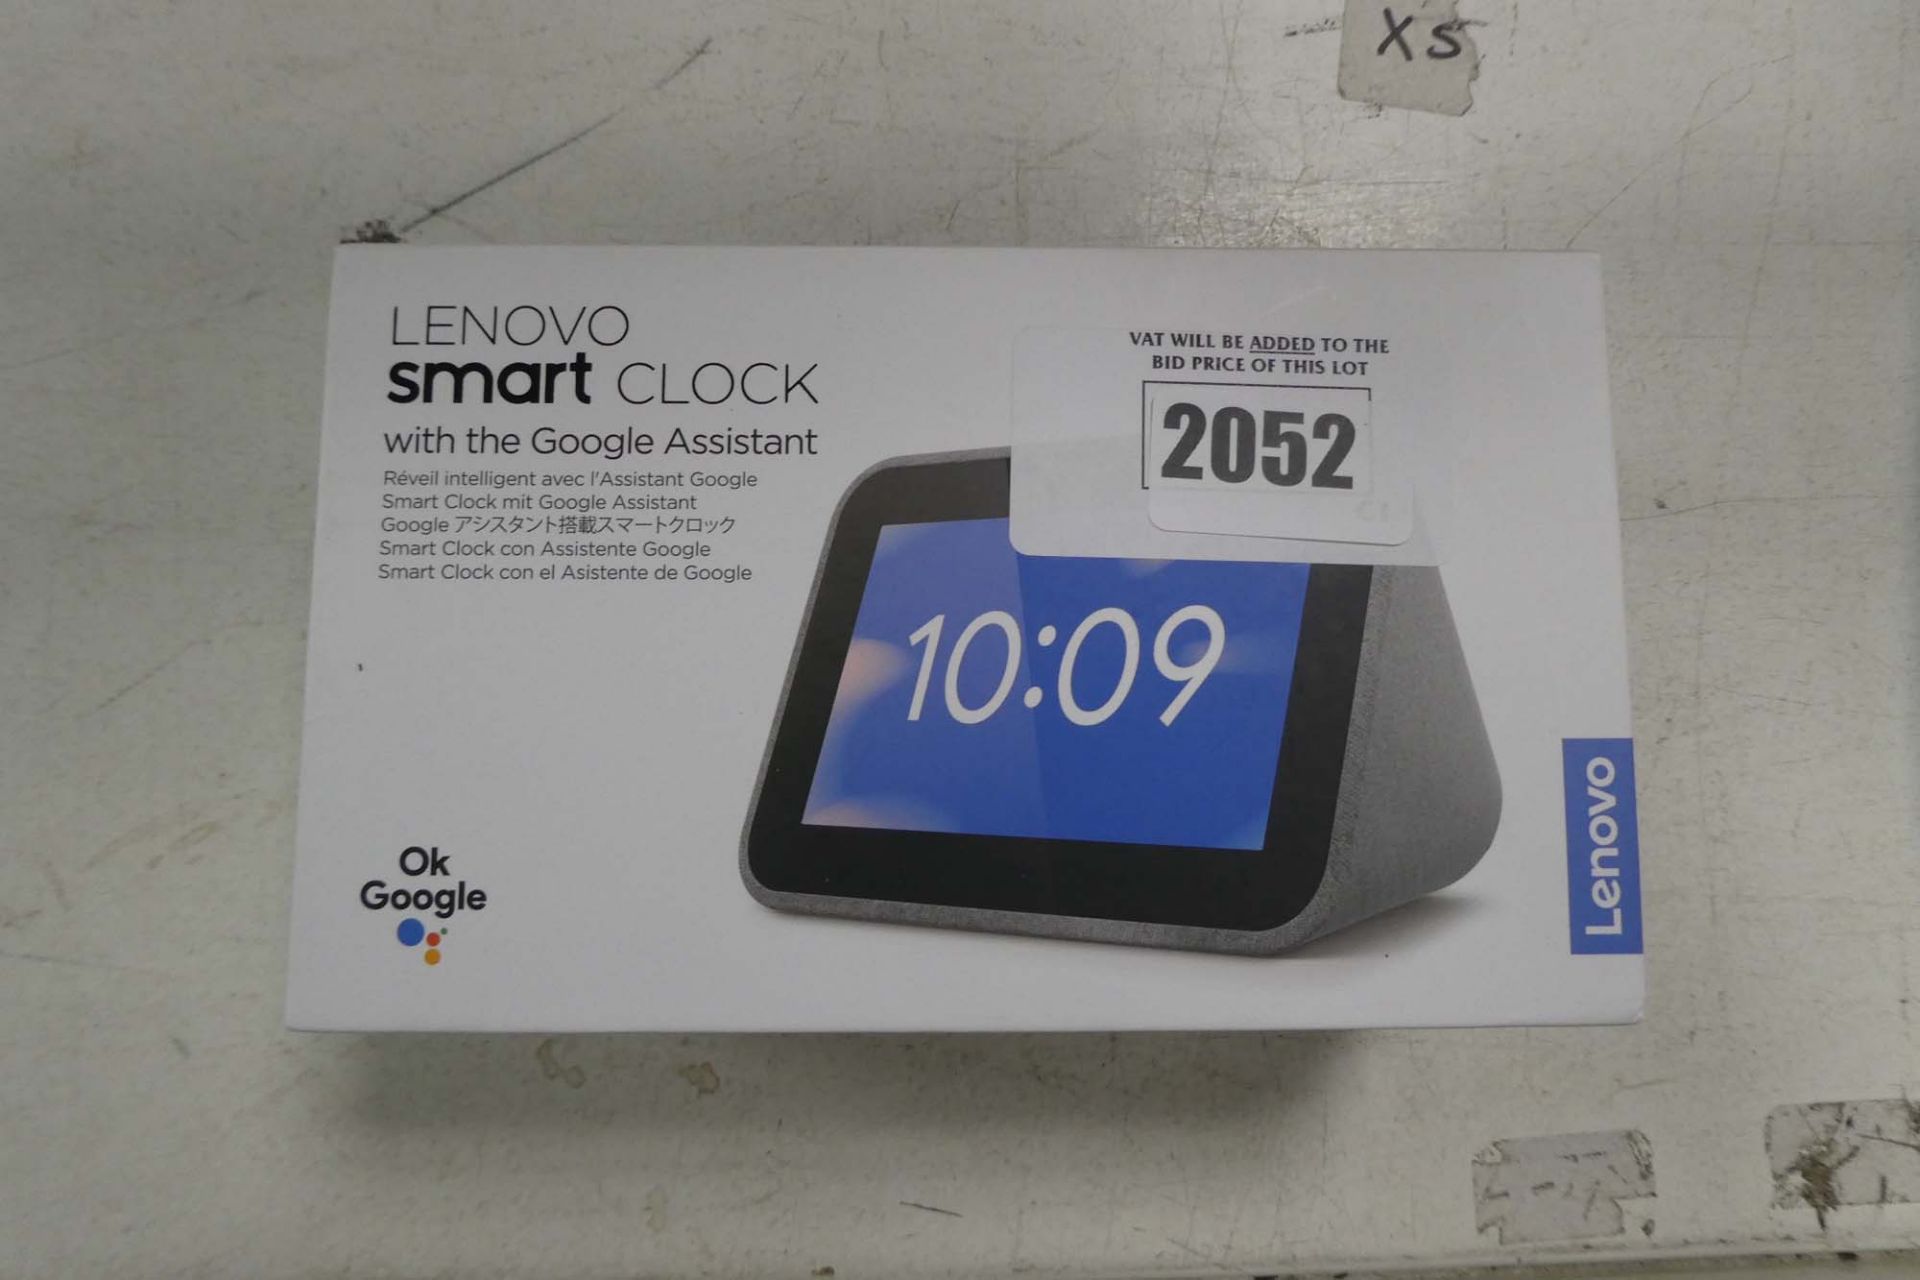 Lenovo smart clock with Google assistant built in and box, no power supply